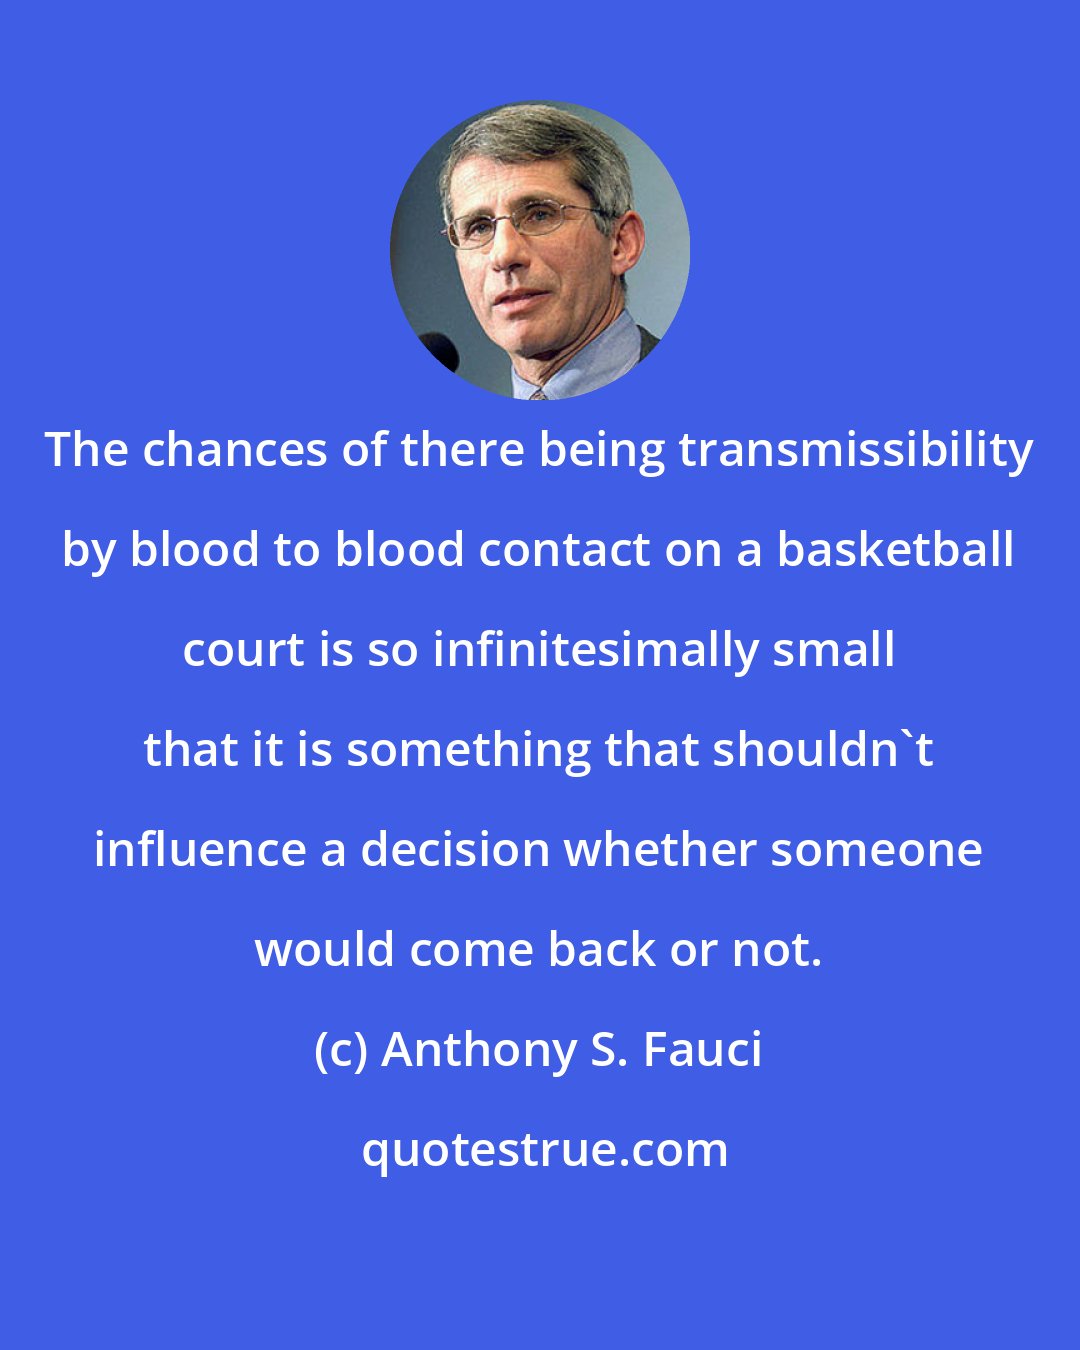 Anthony S. Fauci: The chances of there being transmissibility by blood to blood contact on a basketball court is so infinitesimally small that it is something that shouldn't influence a decision whether someone would come back or not.